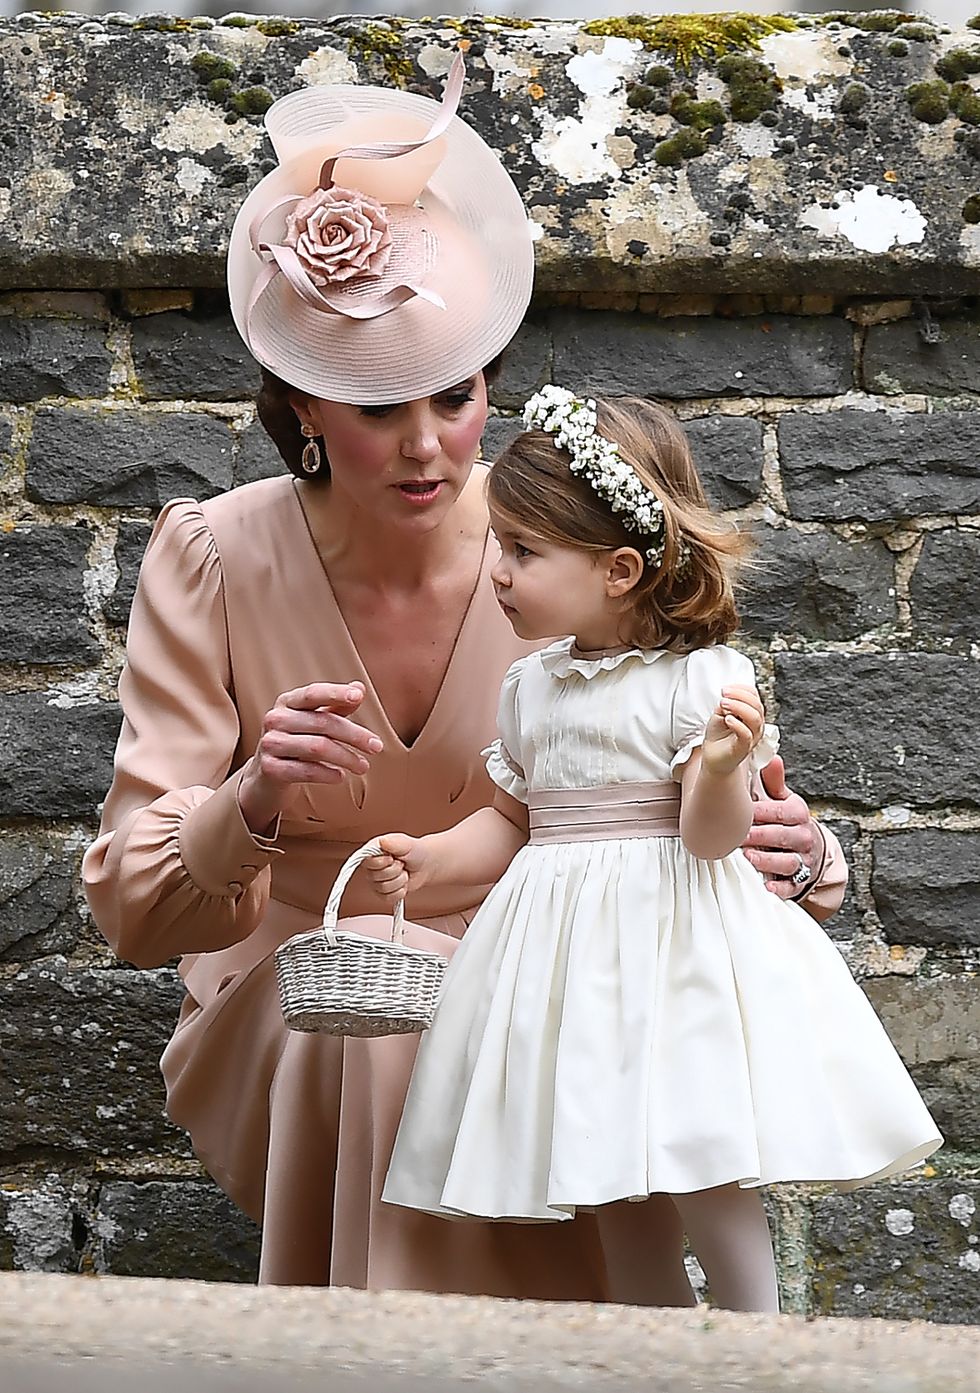 ENGLEFIELD GREEN, ENGLAND - MAY 20:  Catherine, Duchess of Cambridge stands with her daughter Princess Charlotte of Cambridge, a bridesmaid, following the wedding of her sister Pippa Middleton to James Matthews at St Mark's Church on May 20, 2017 in Englefield Green, England.  (Photo by Justin Tallis - WPA Pool)